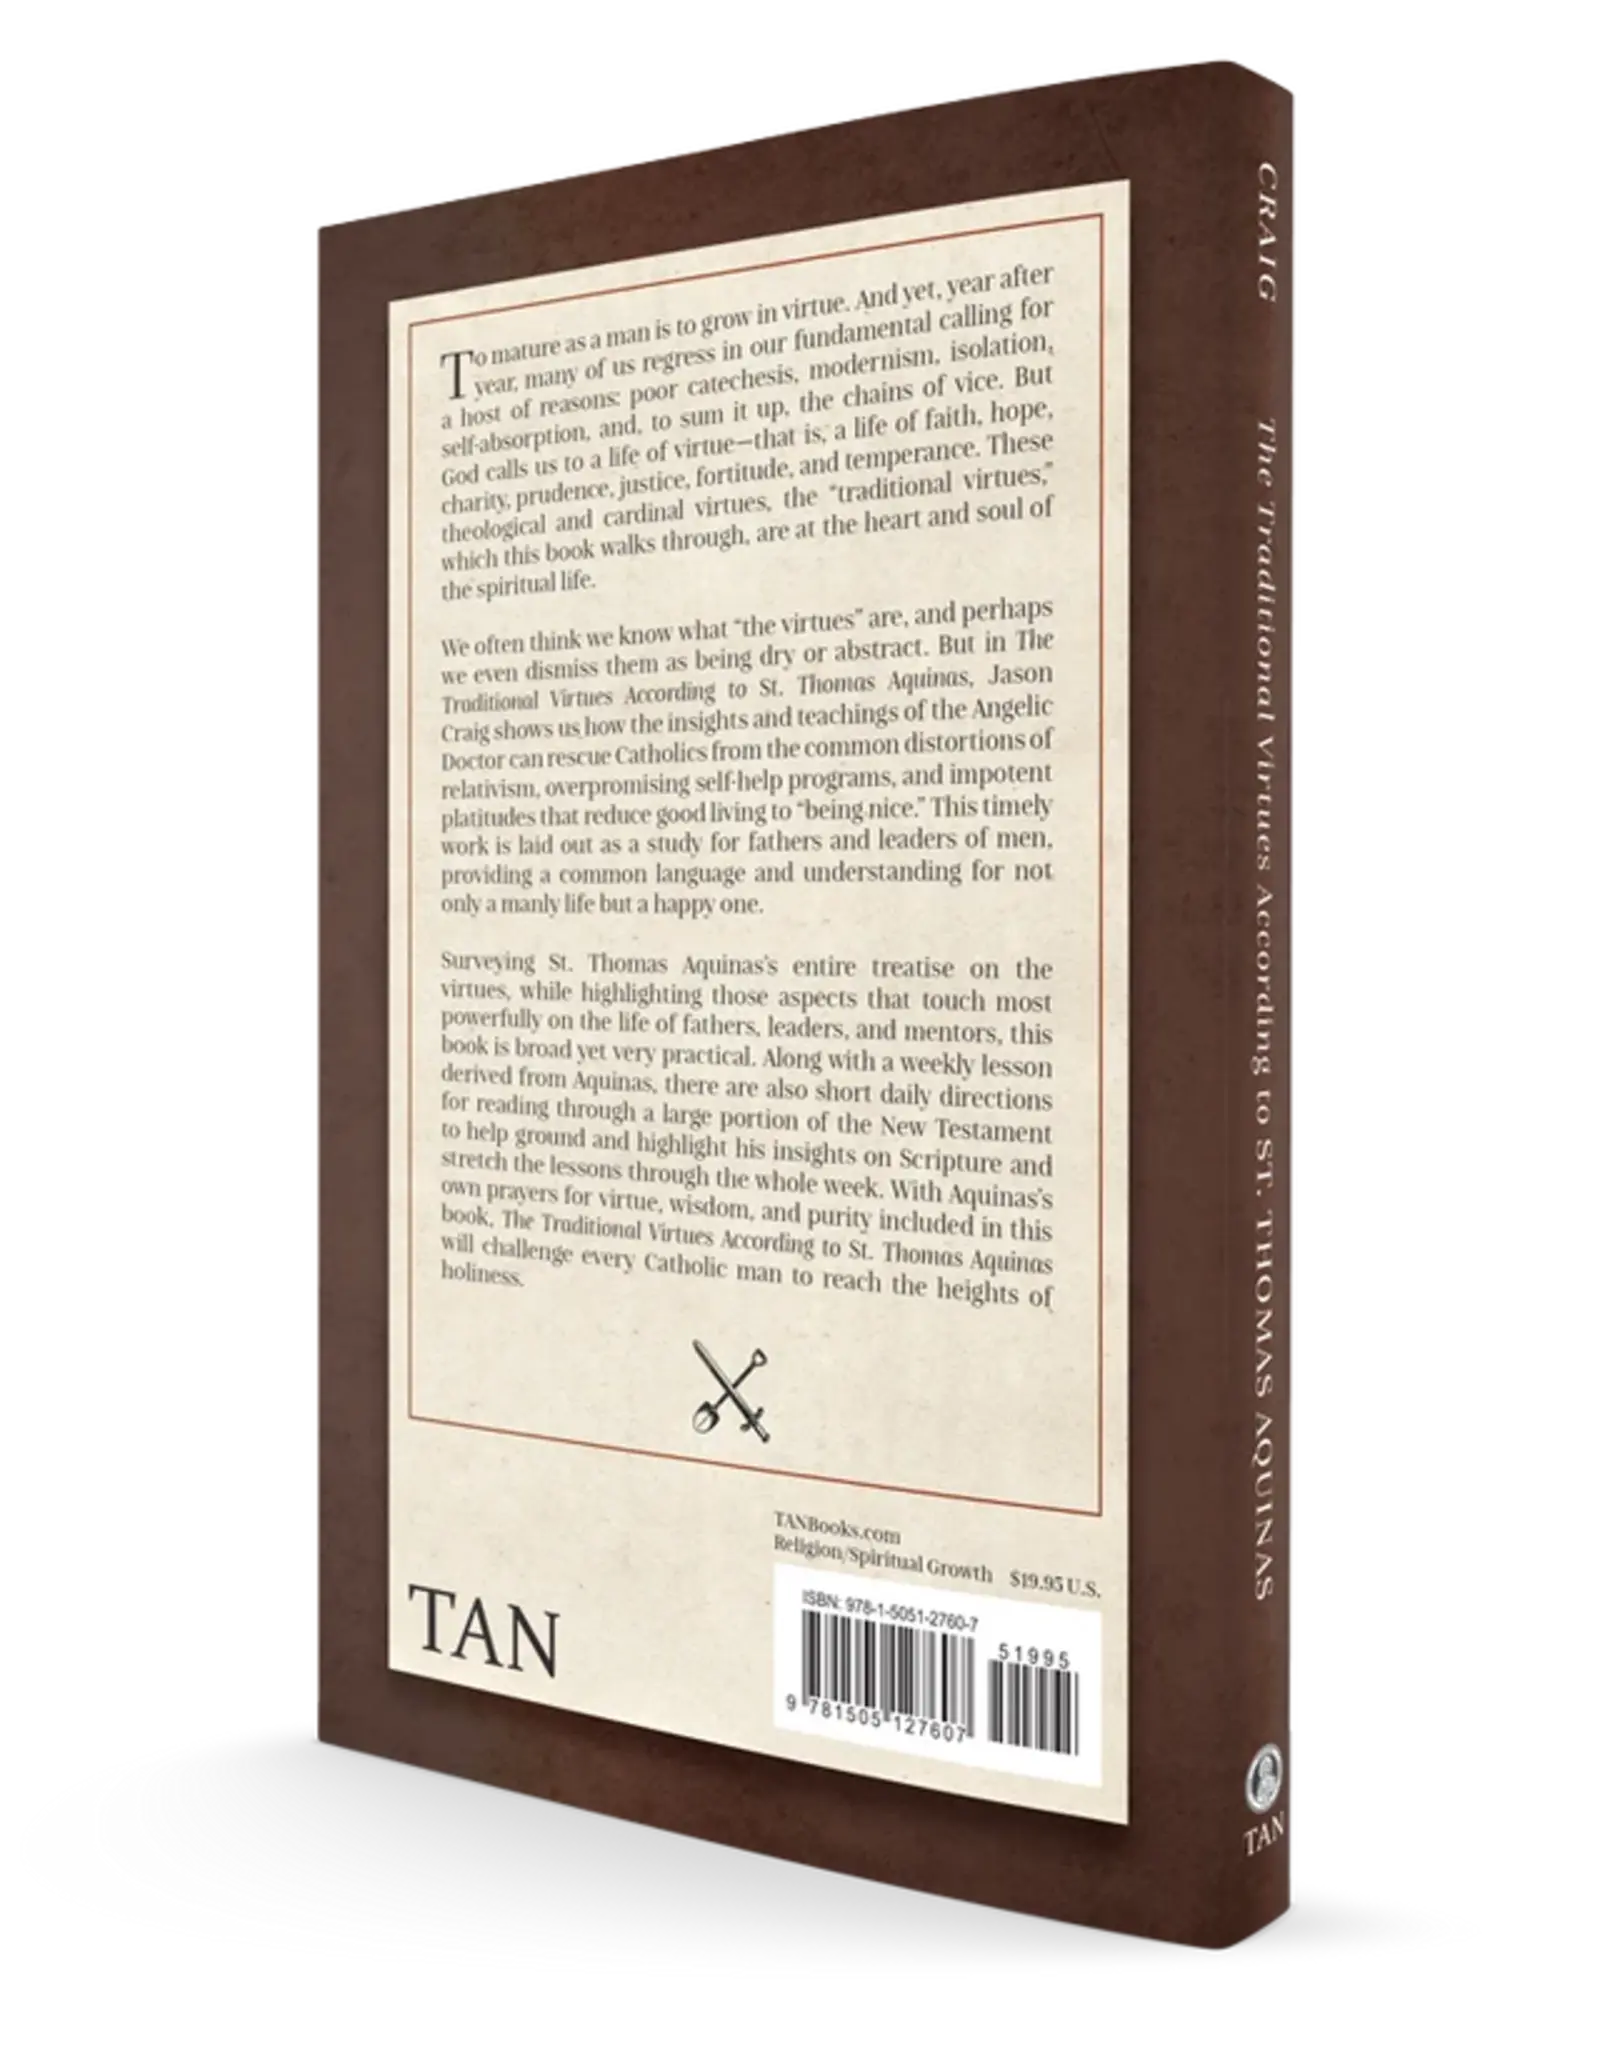 Tan Books (St. Benedict Press) Traditional Virtues According to St. Thomas Aquinas: A Study for Men